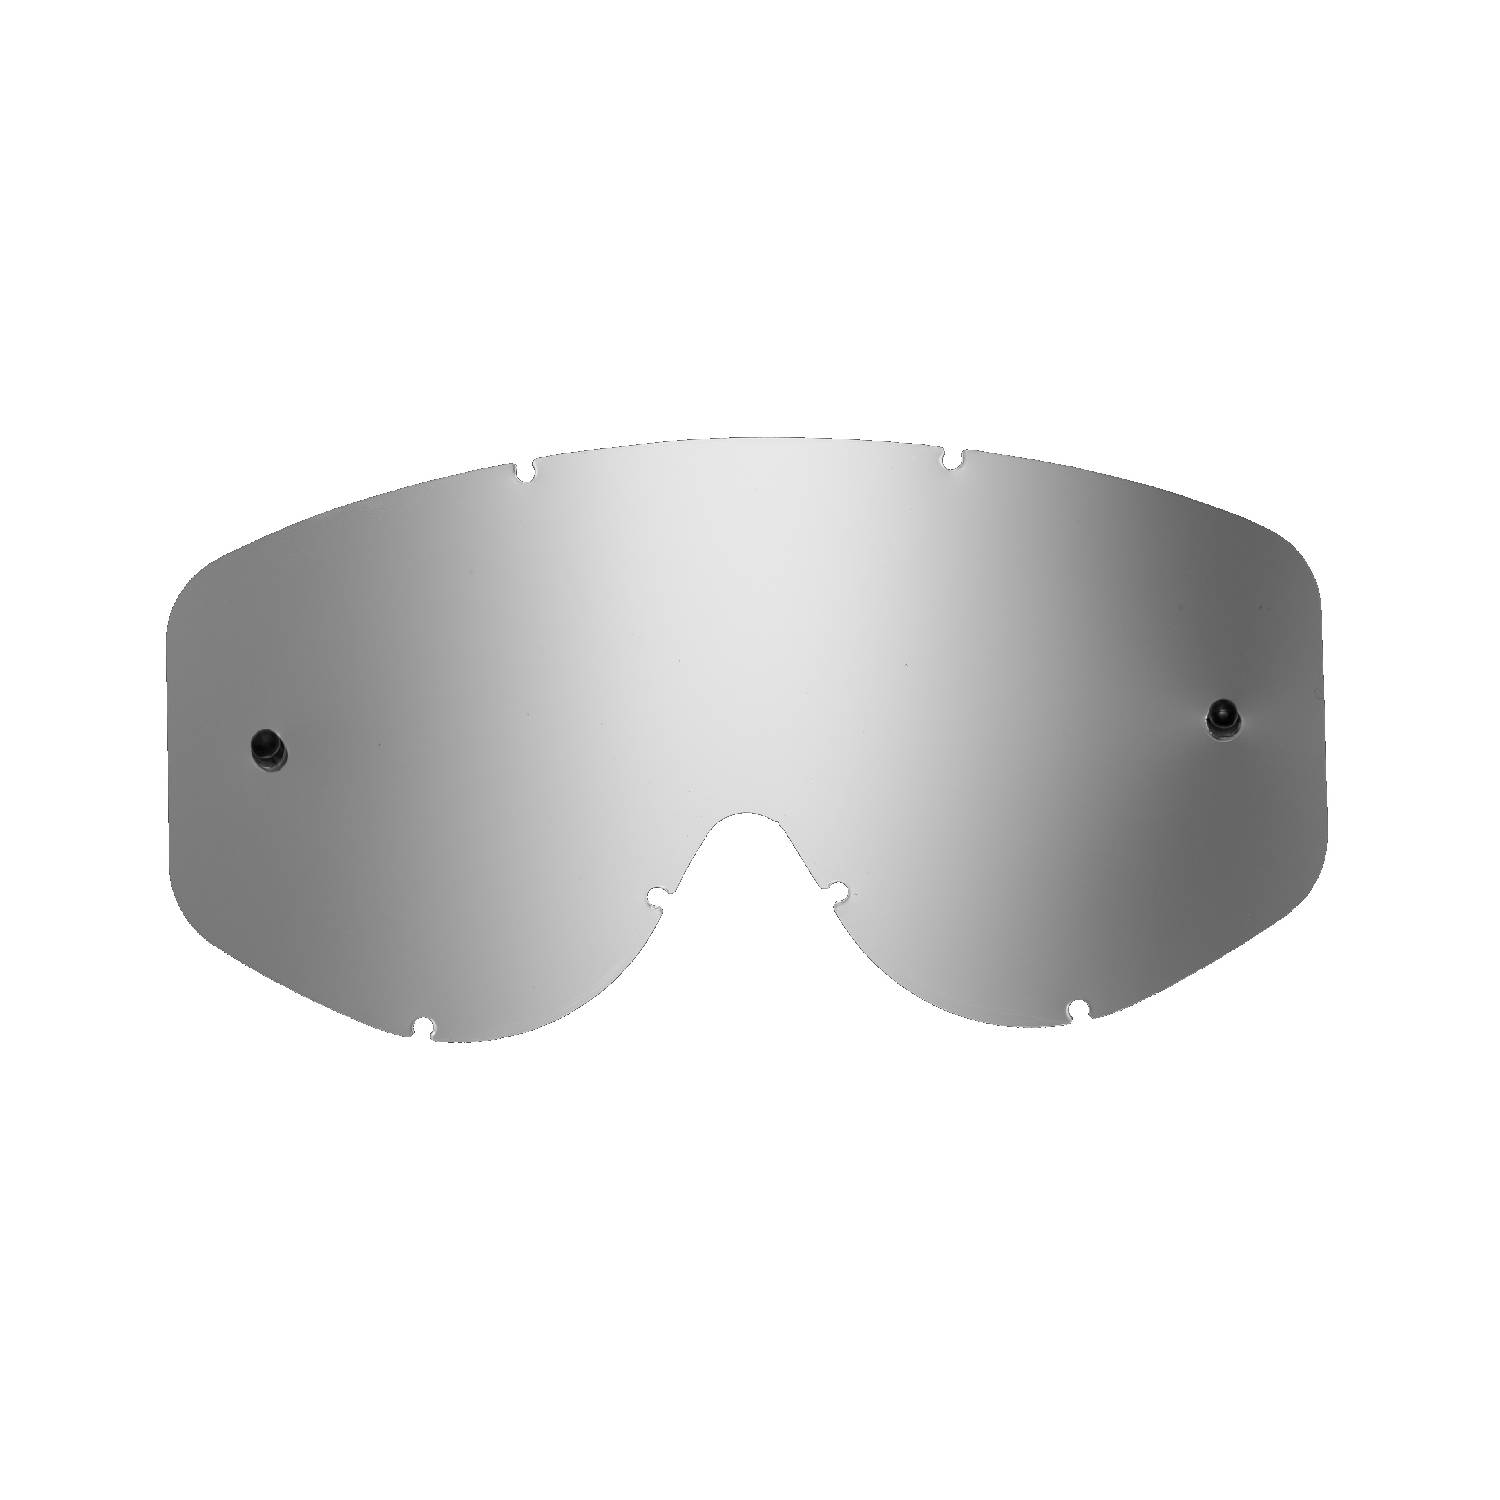 silver-toned mirrored replacement lenses for goggles compatible for Scott 83/89 / Recoil / 89 Xi goggle